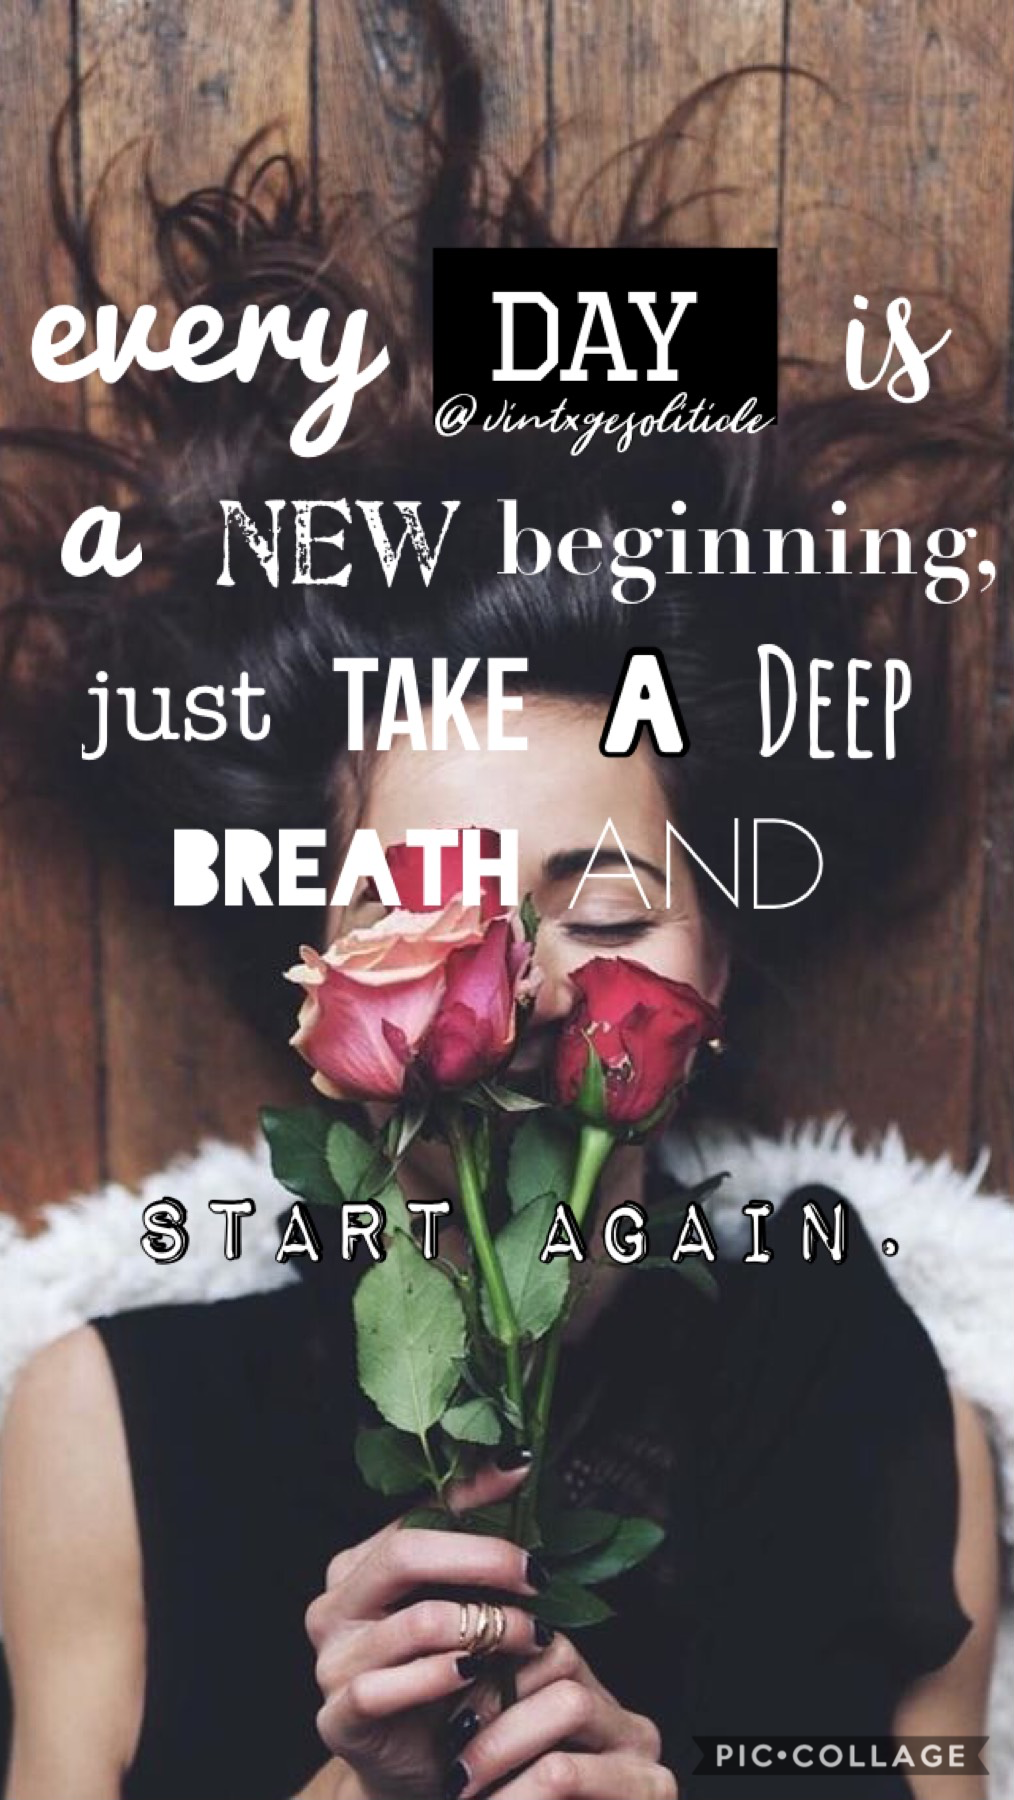 🥀 tap 🌹👀
-
🌻 everyday is a new beginning, just take a deep breath and start again. 🍂 

@vintxgesolitude